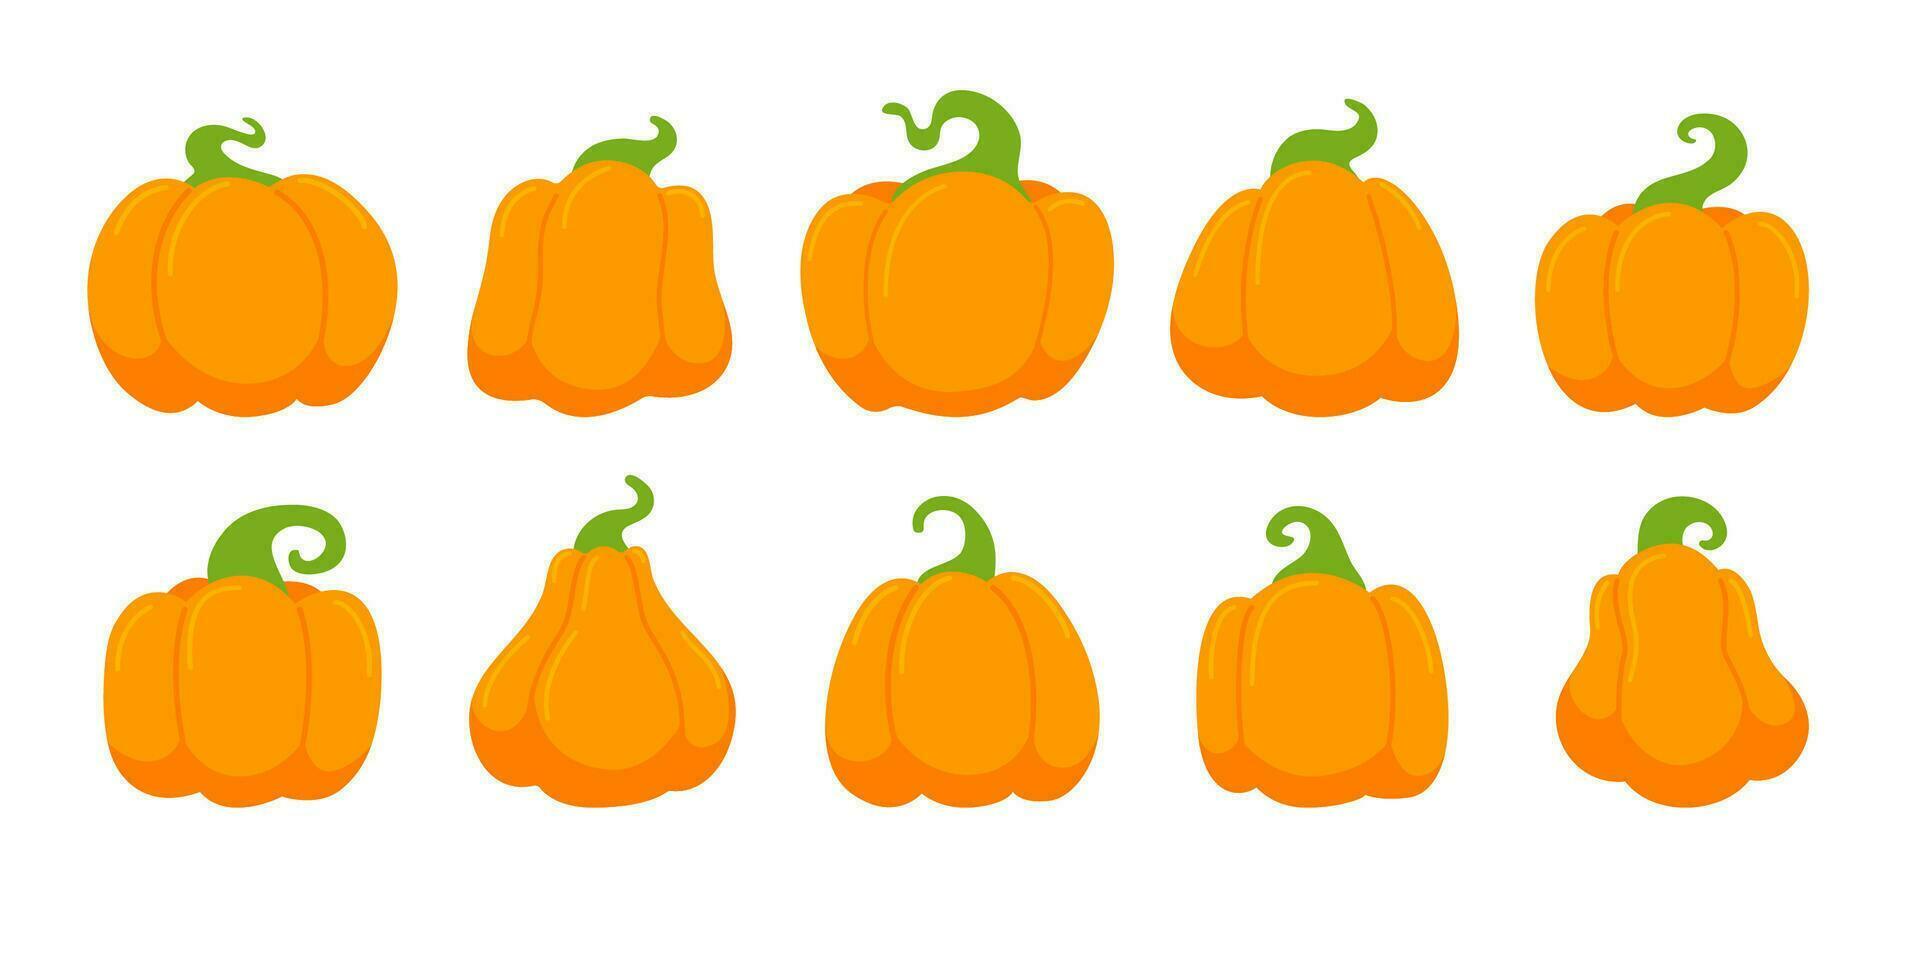 yellow pumpkin collection For carving ghost faces on Halloween. vector